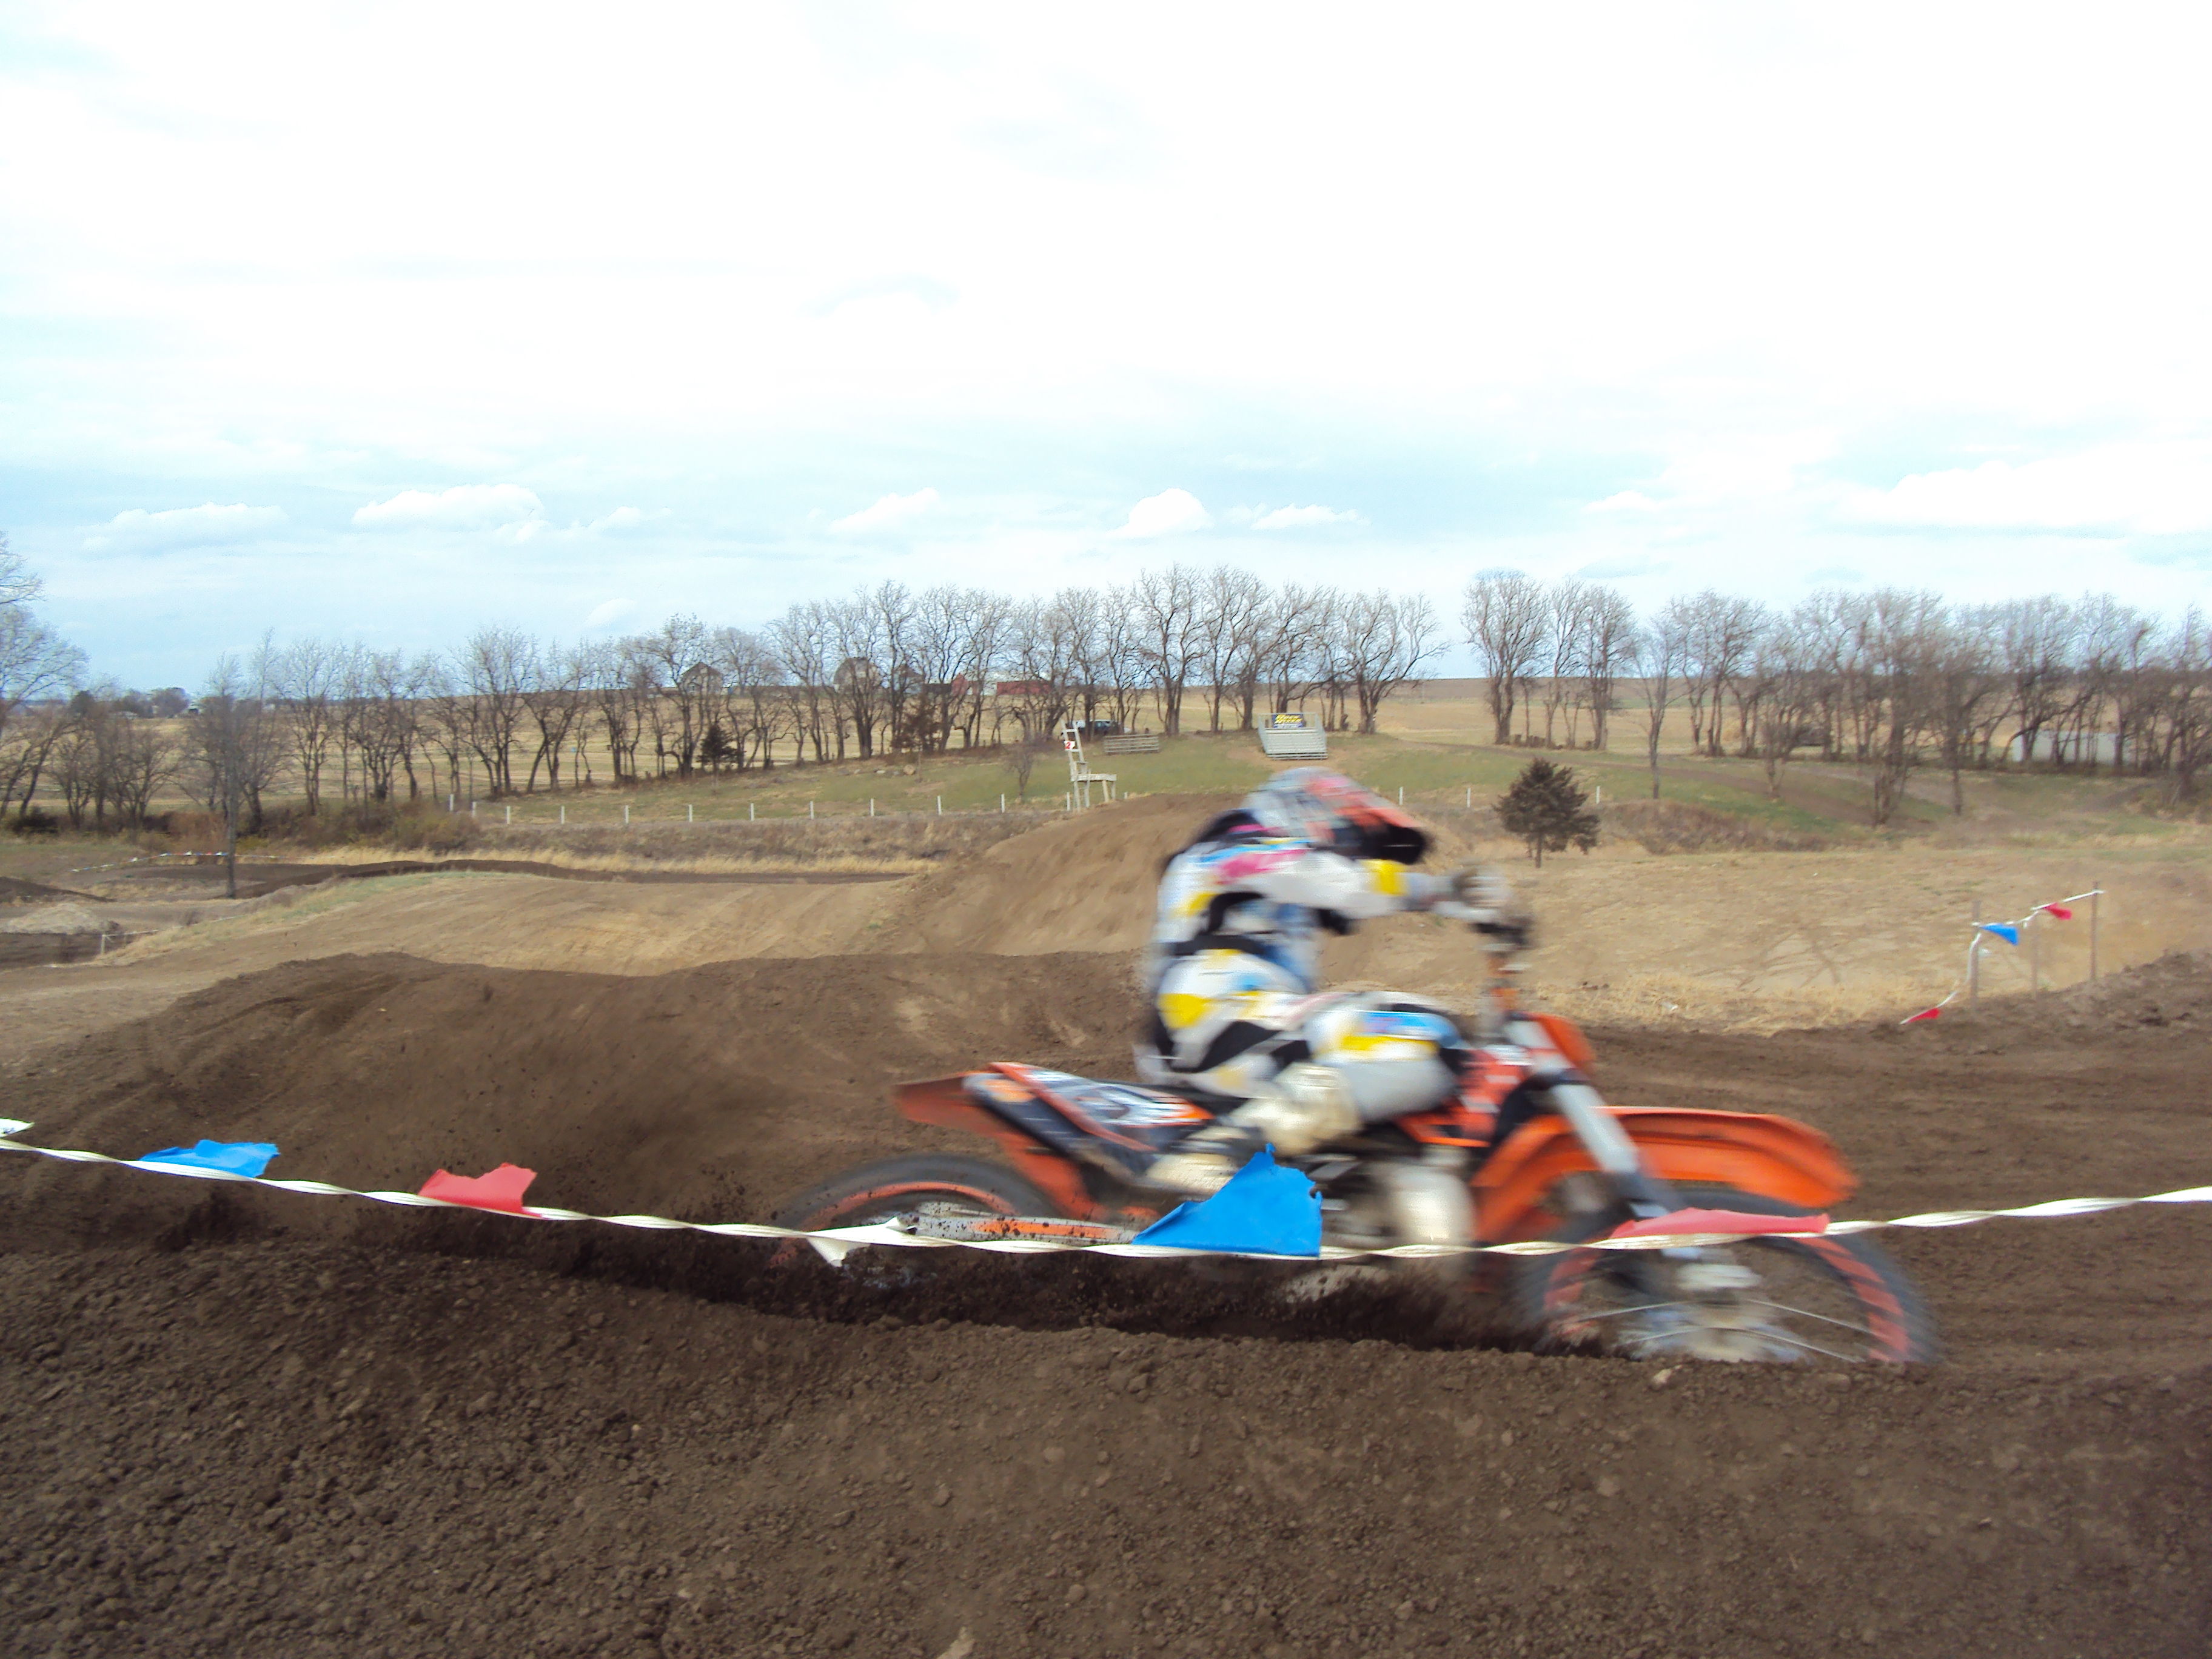 nothin sweeter than blowin up a berm on a 2stroke